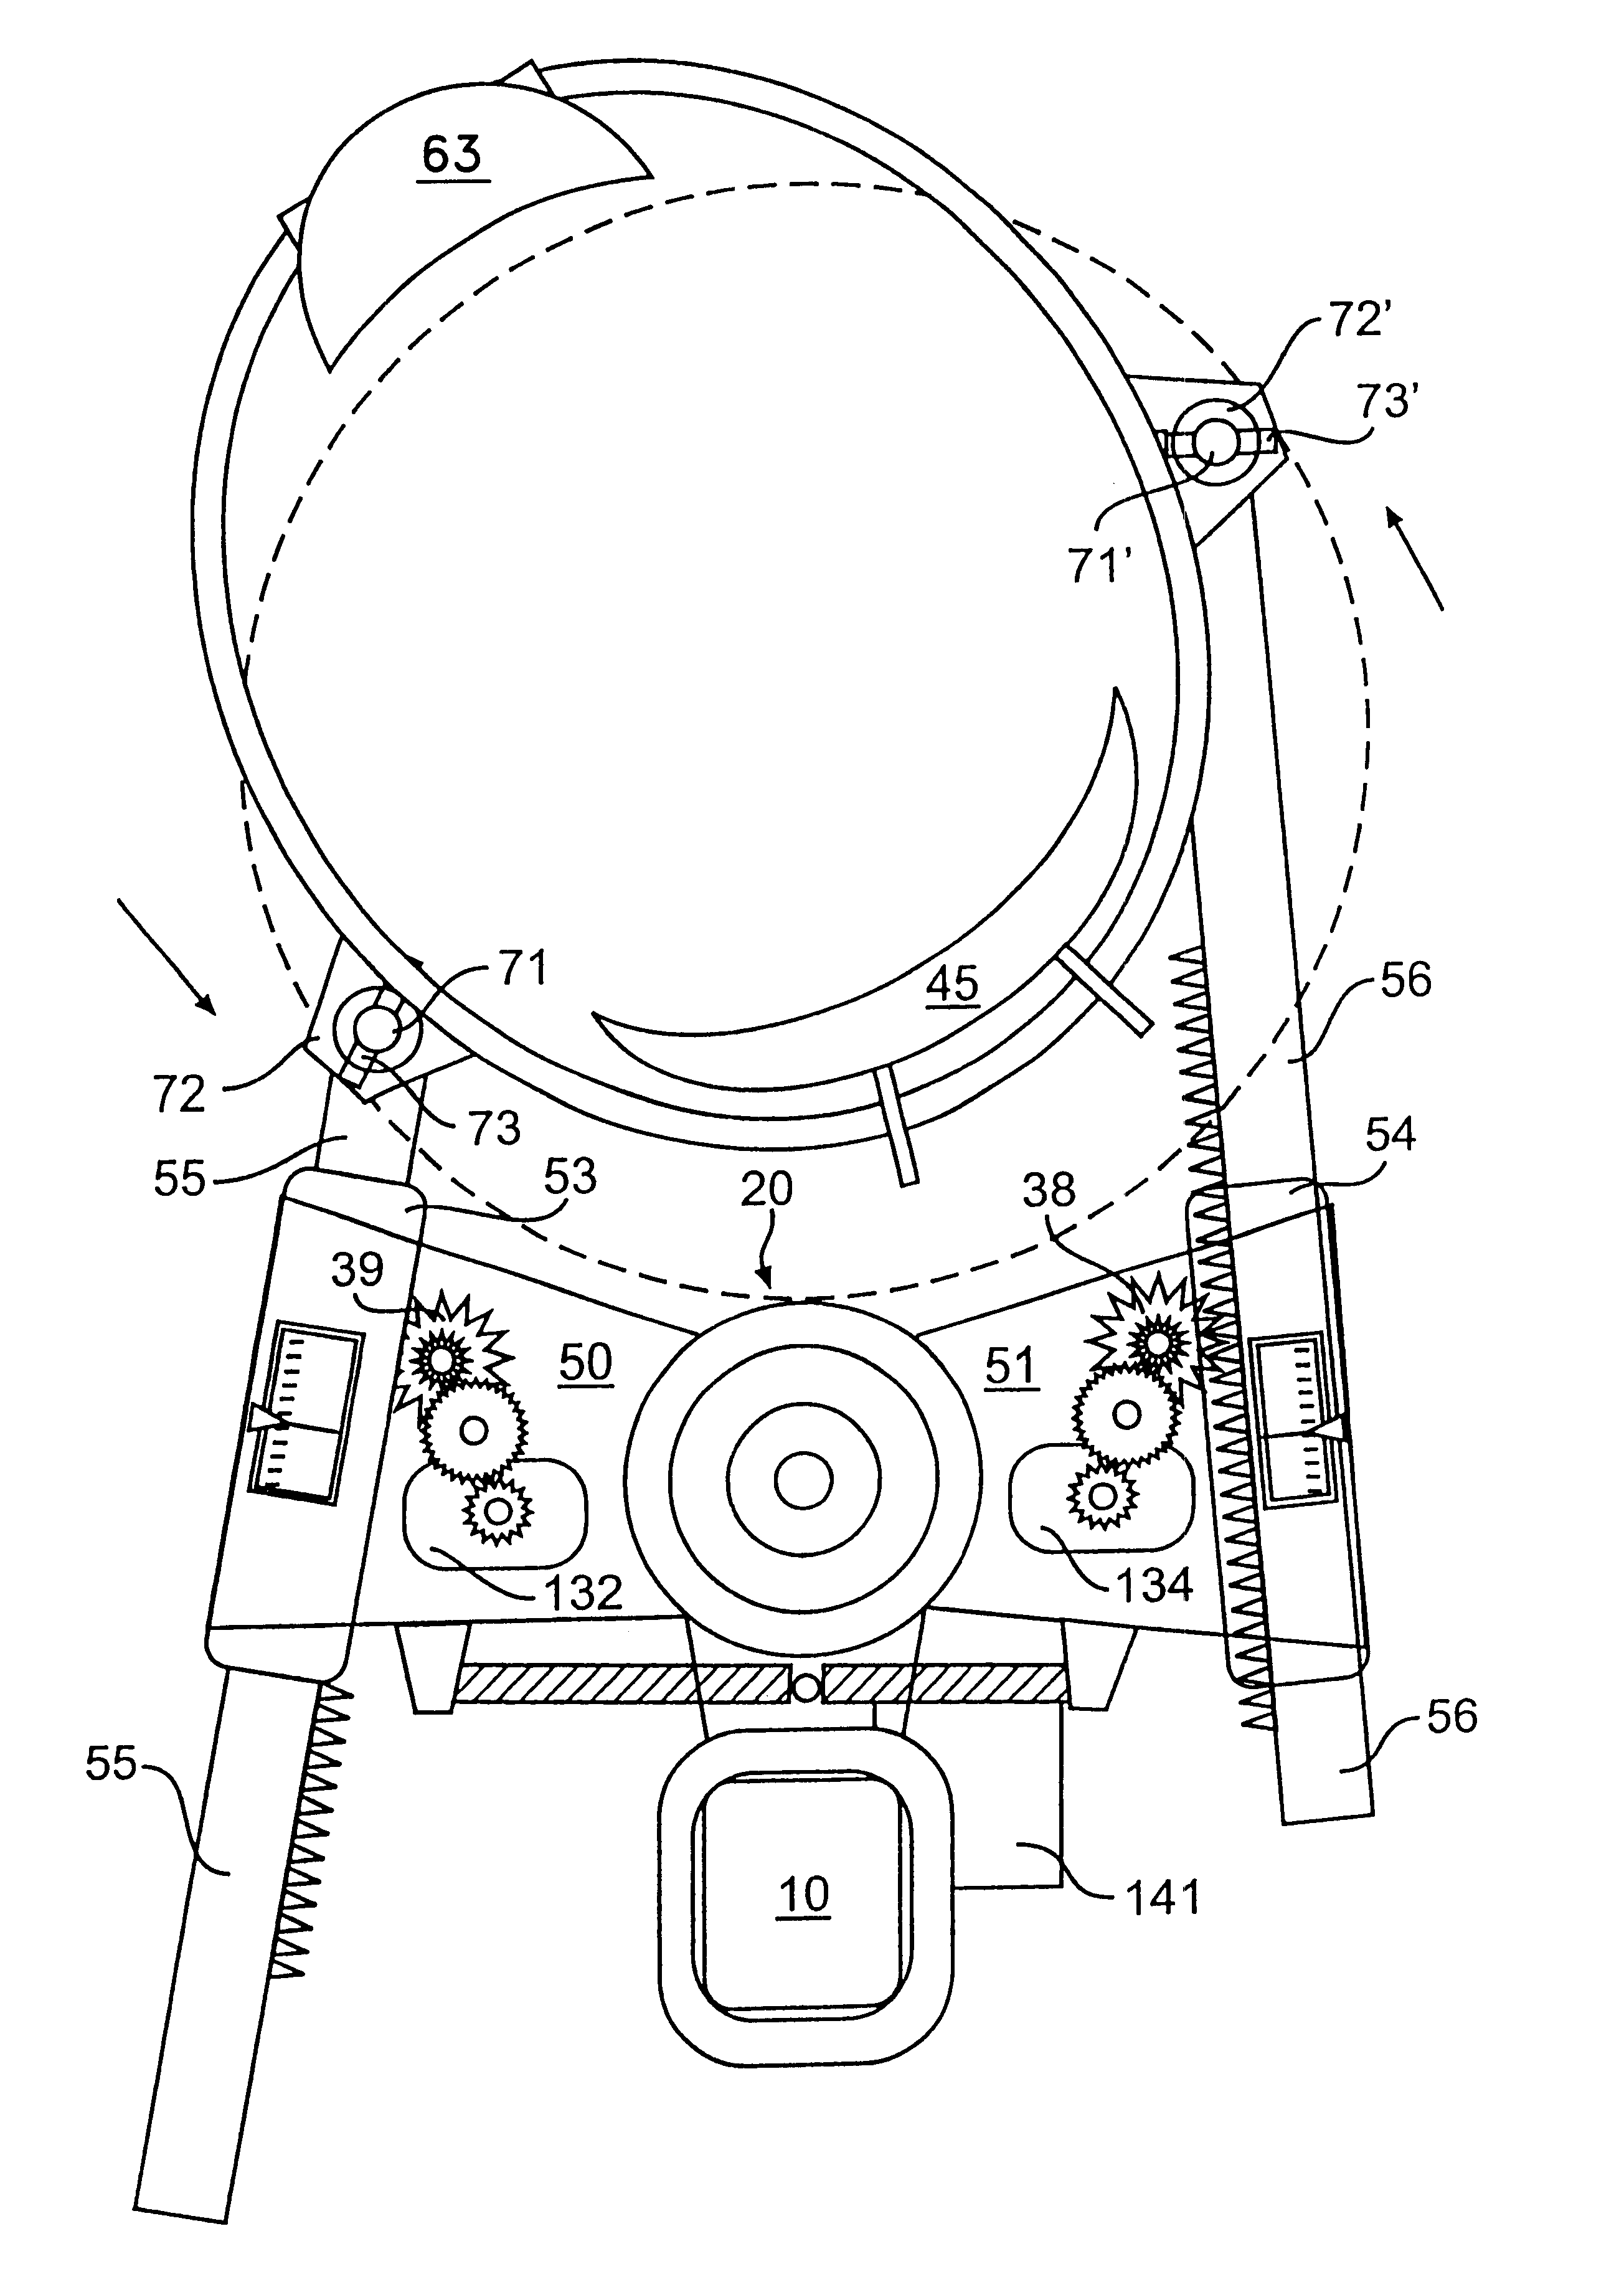 Cervical therapy device